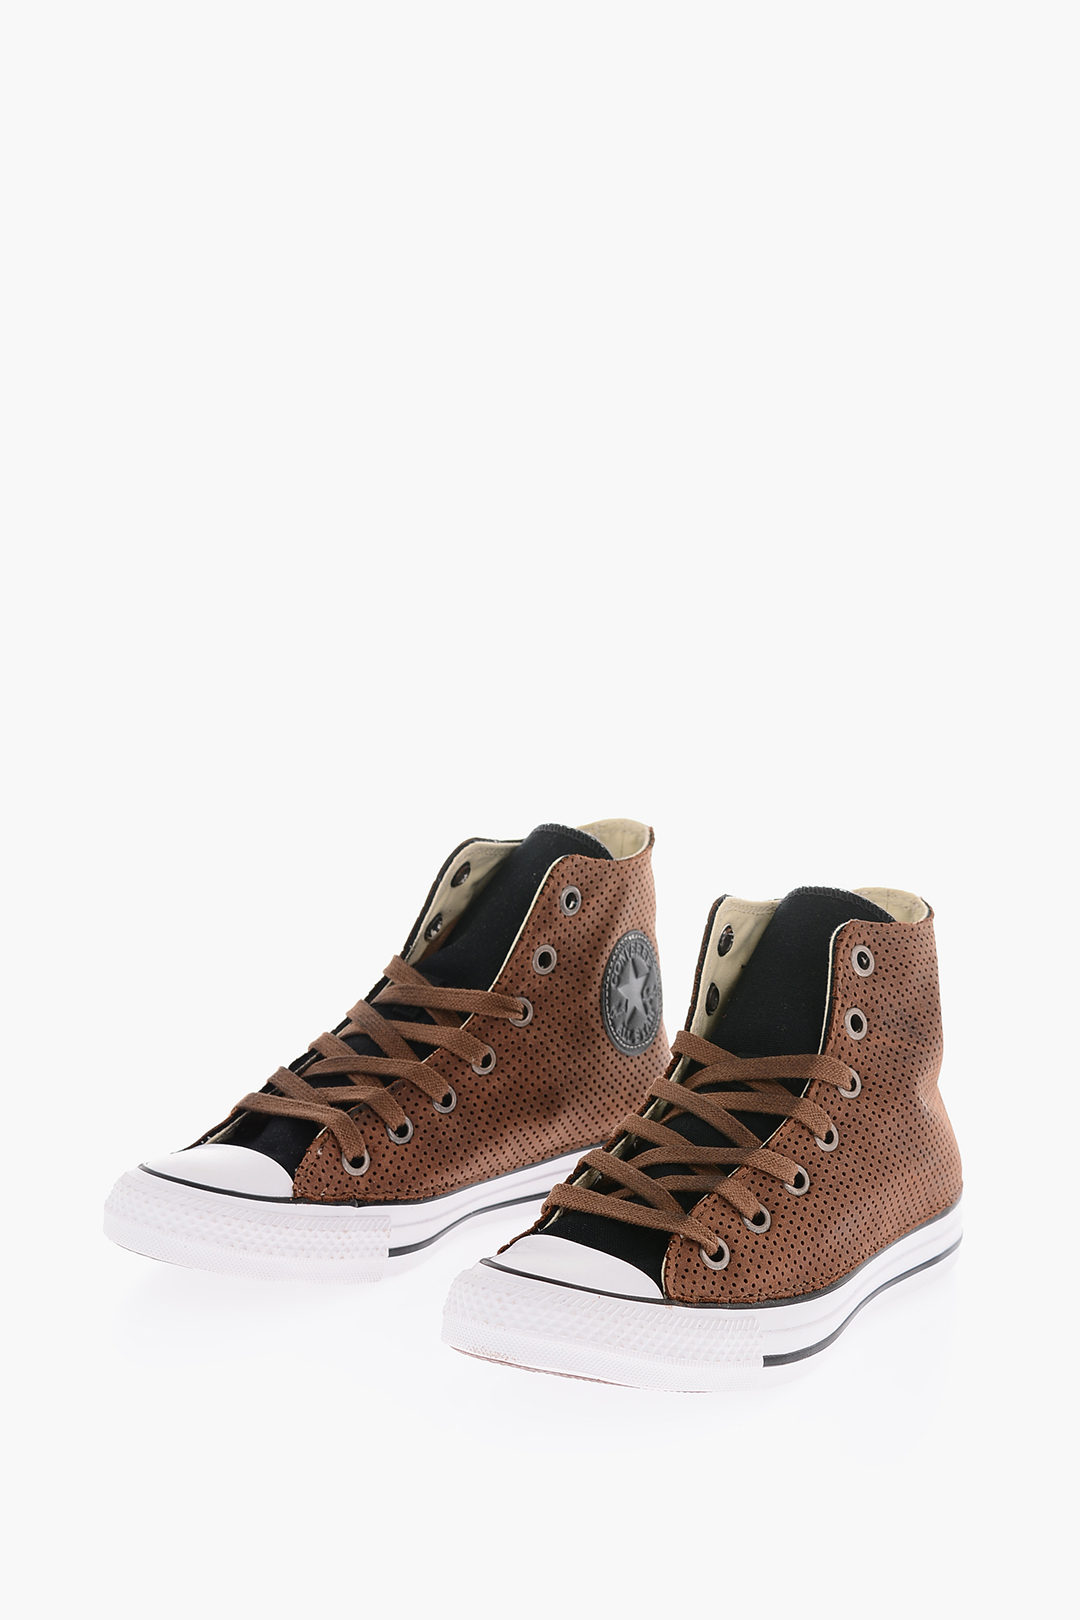 Mekaniker Nautisk Flipper Converse ALL STAR CHUCK TAYLOR Perforated Faux Leather High Sneakers with  Contrasting Tongue men - Glamood Outlet